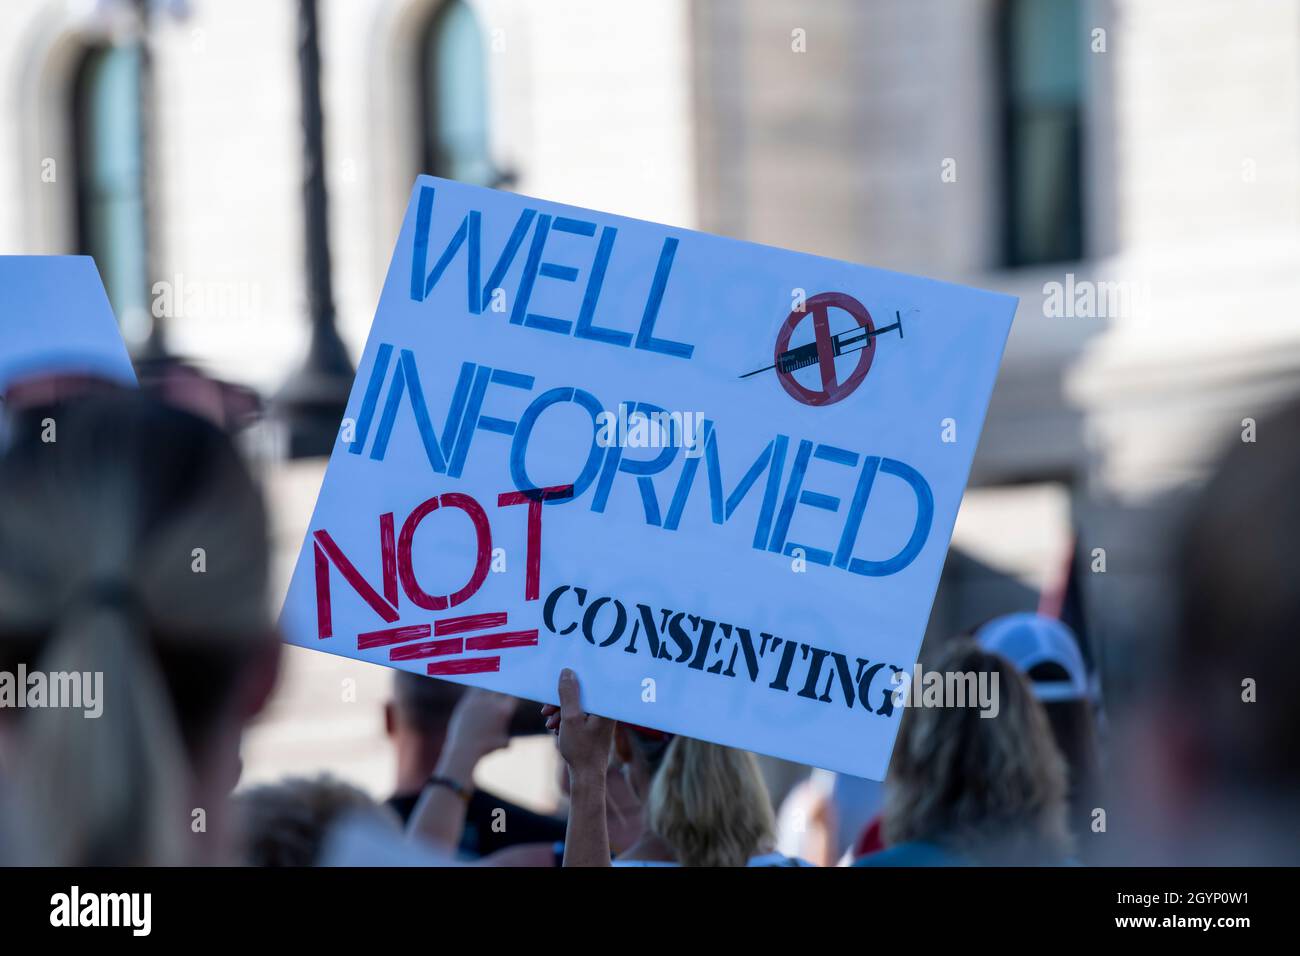 St. Paul, Minnesota. Stop the mandate protest. Protest to stop vaccine mandates and passports. Anti-vaccine movement. Stock Photo